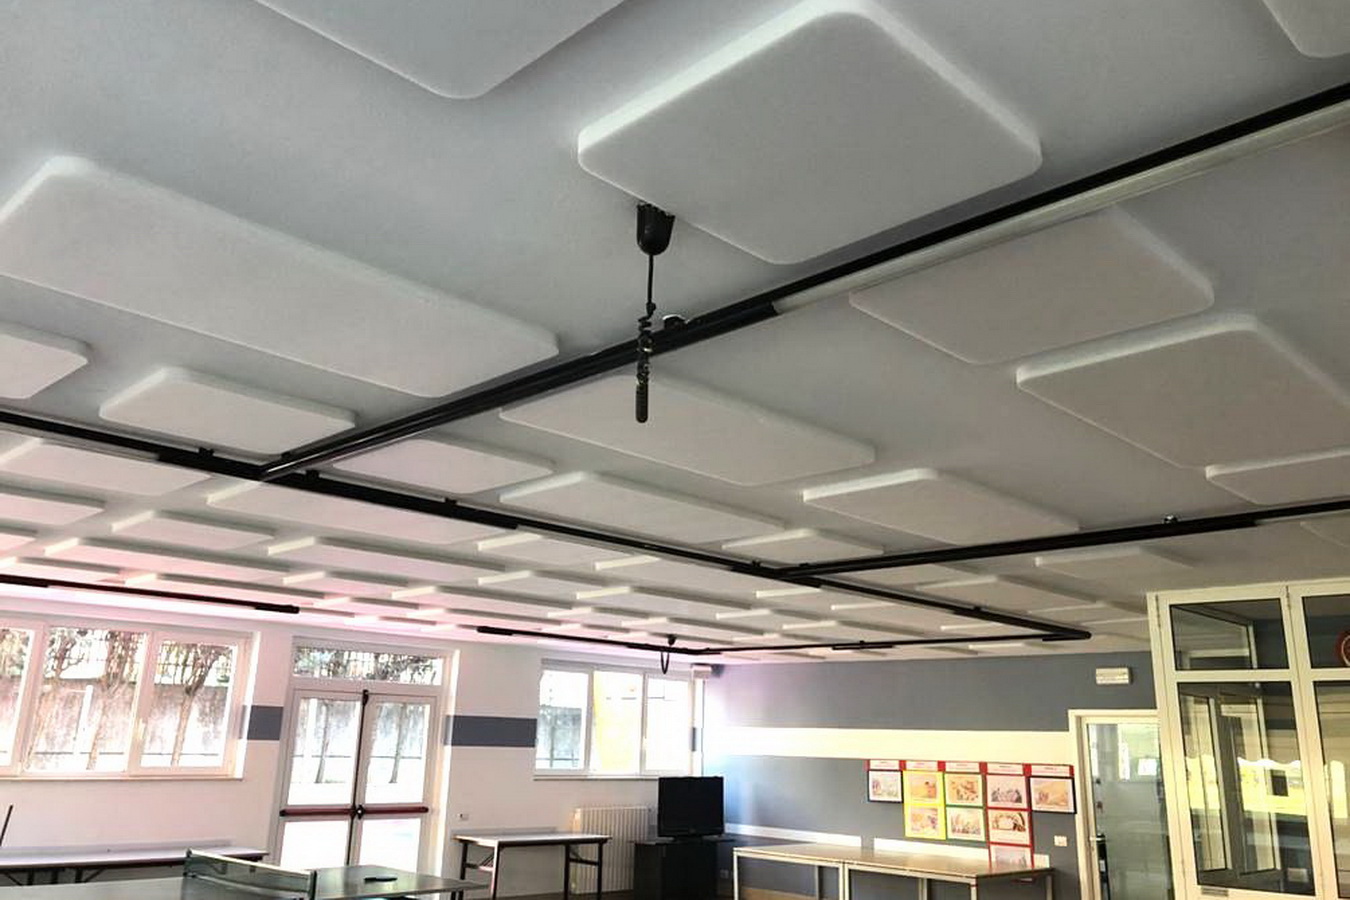 Sound absorbing panels for low budget polyester absorbers glued to the ceiling